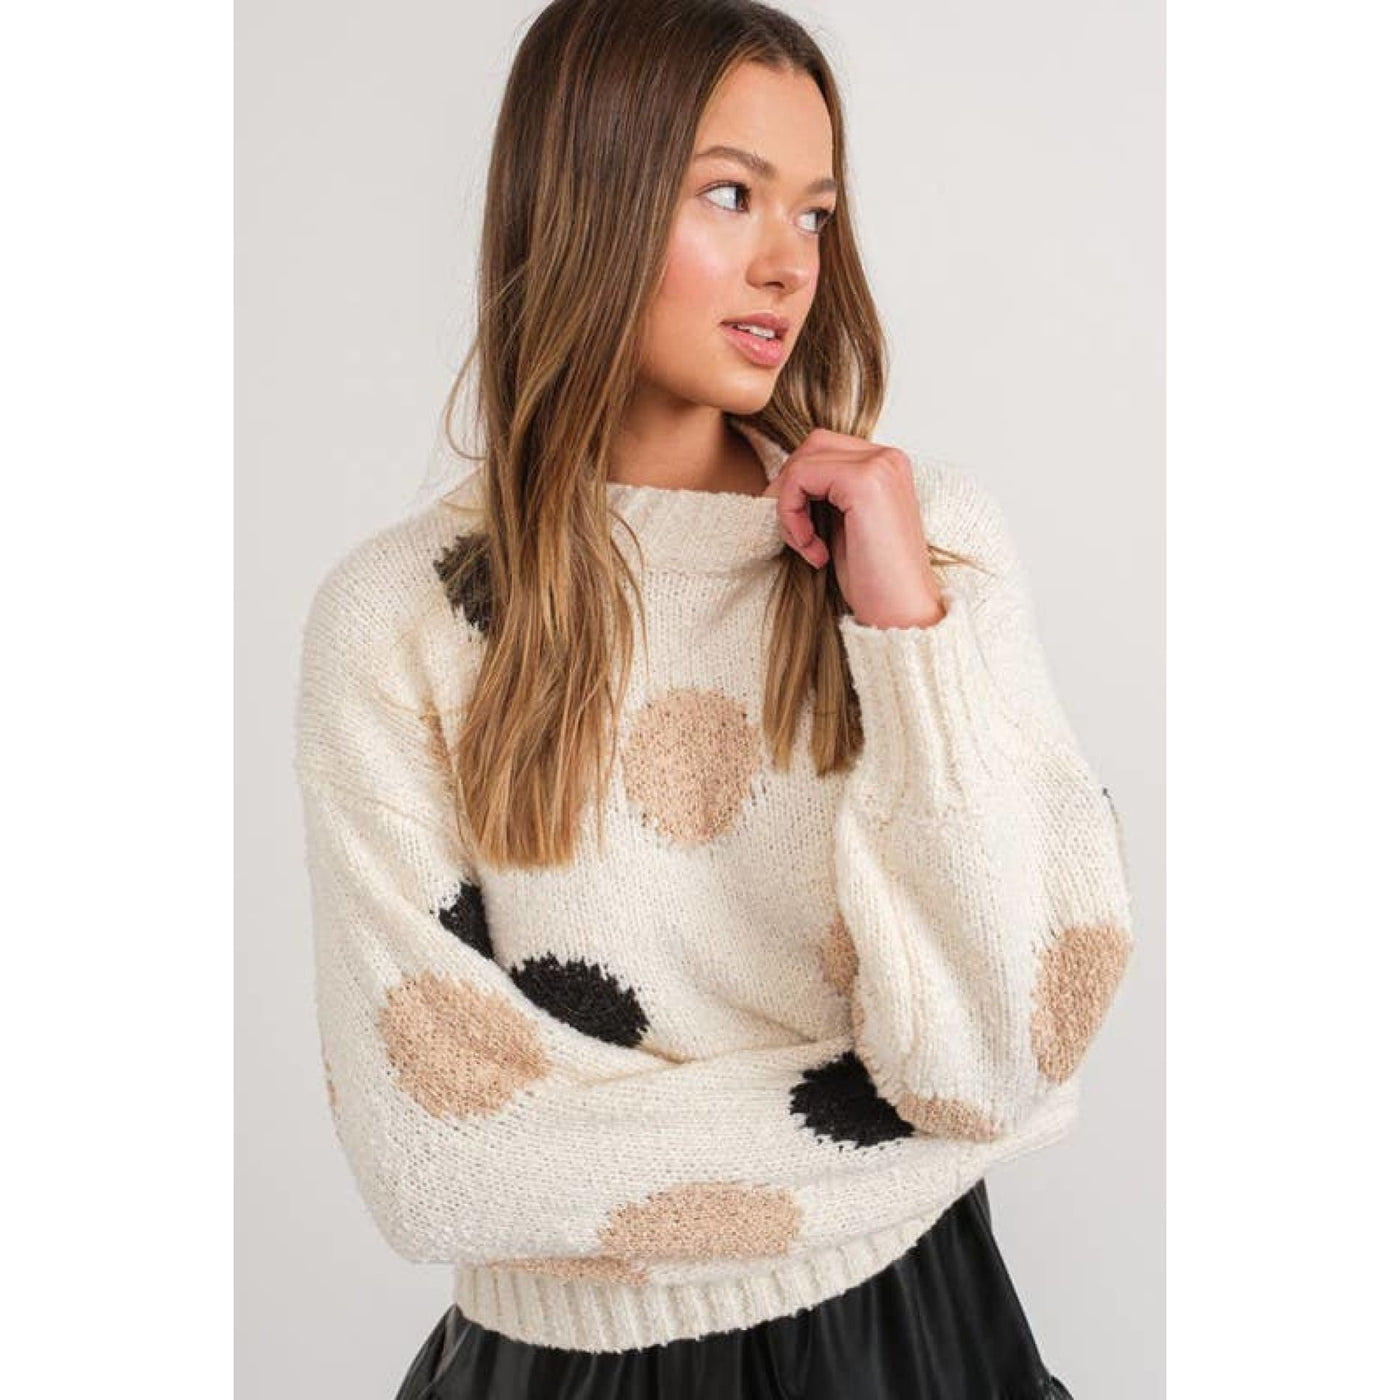 Sweetly Thinking Sweater - 130 Sweaters/Cardigans